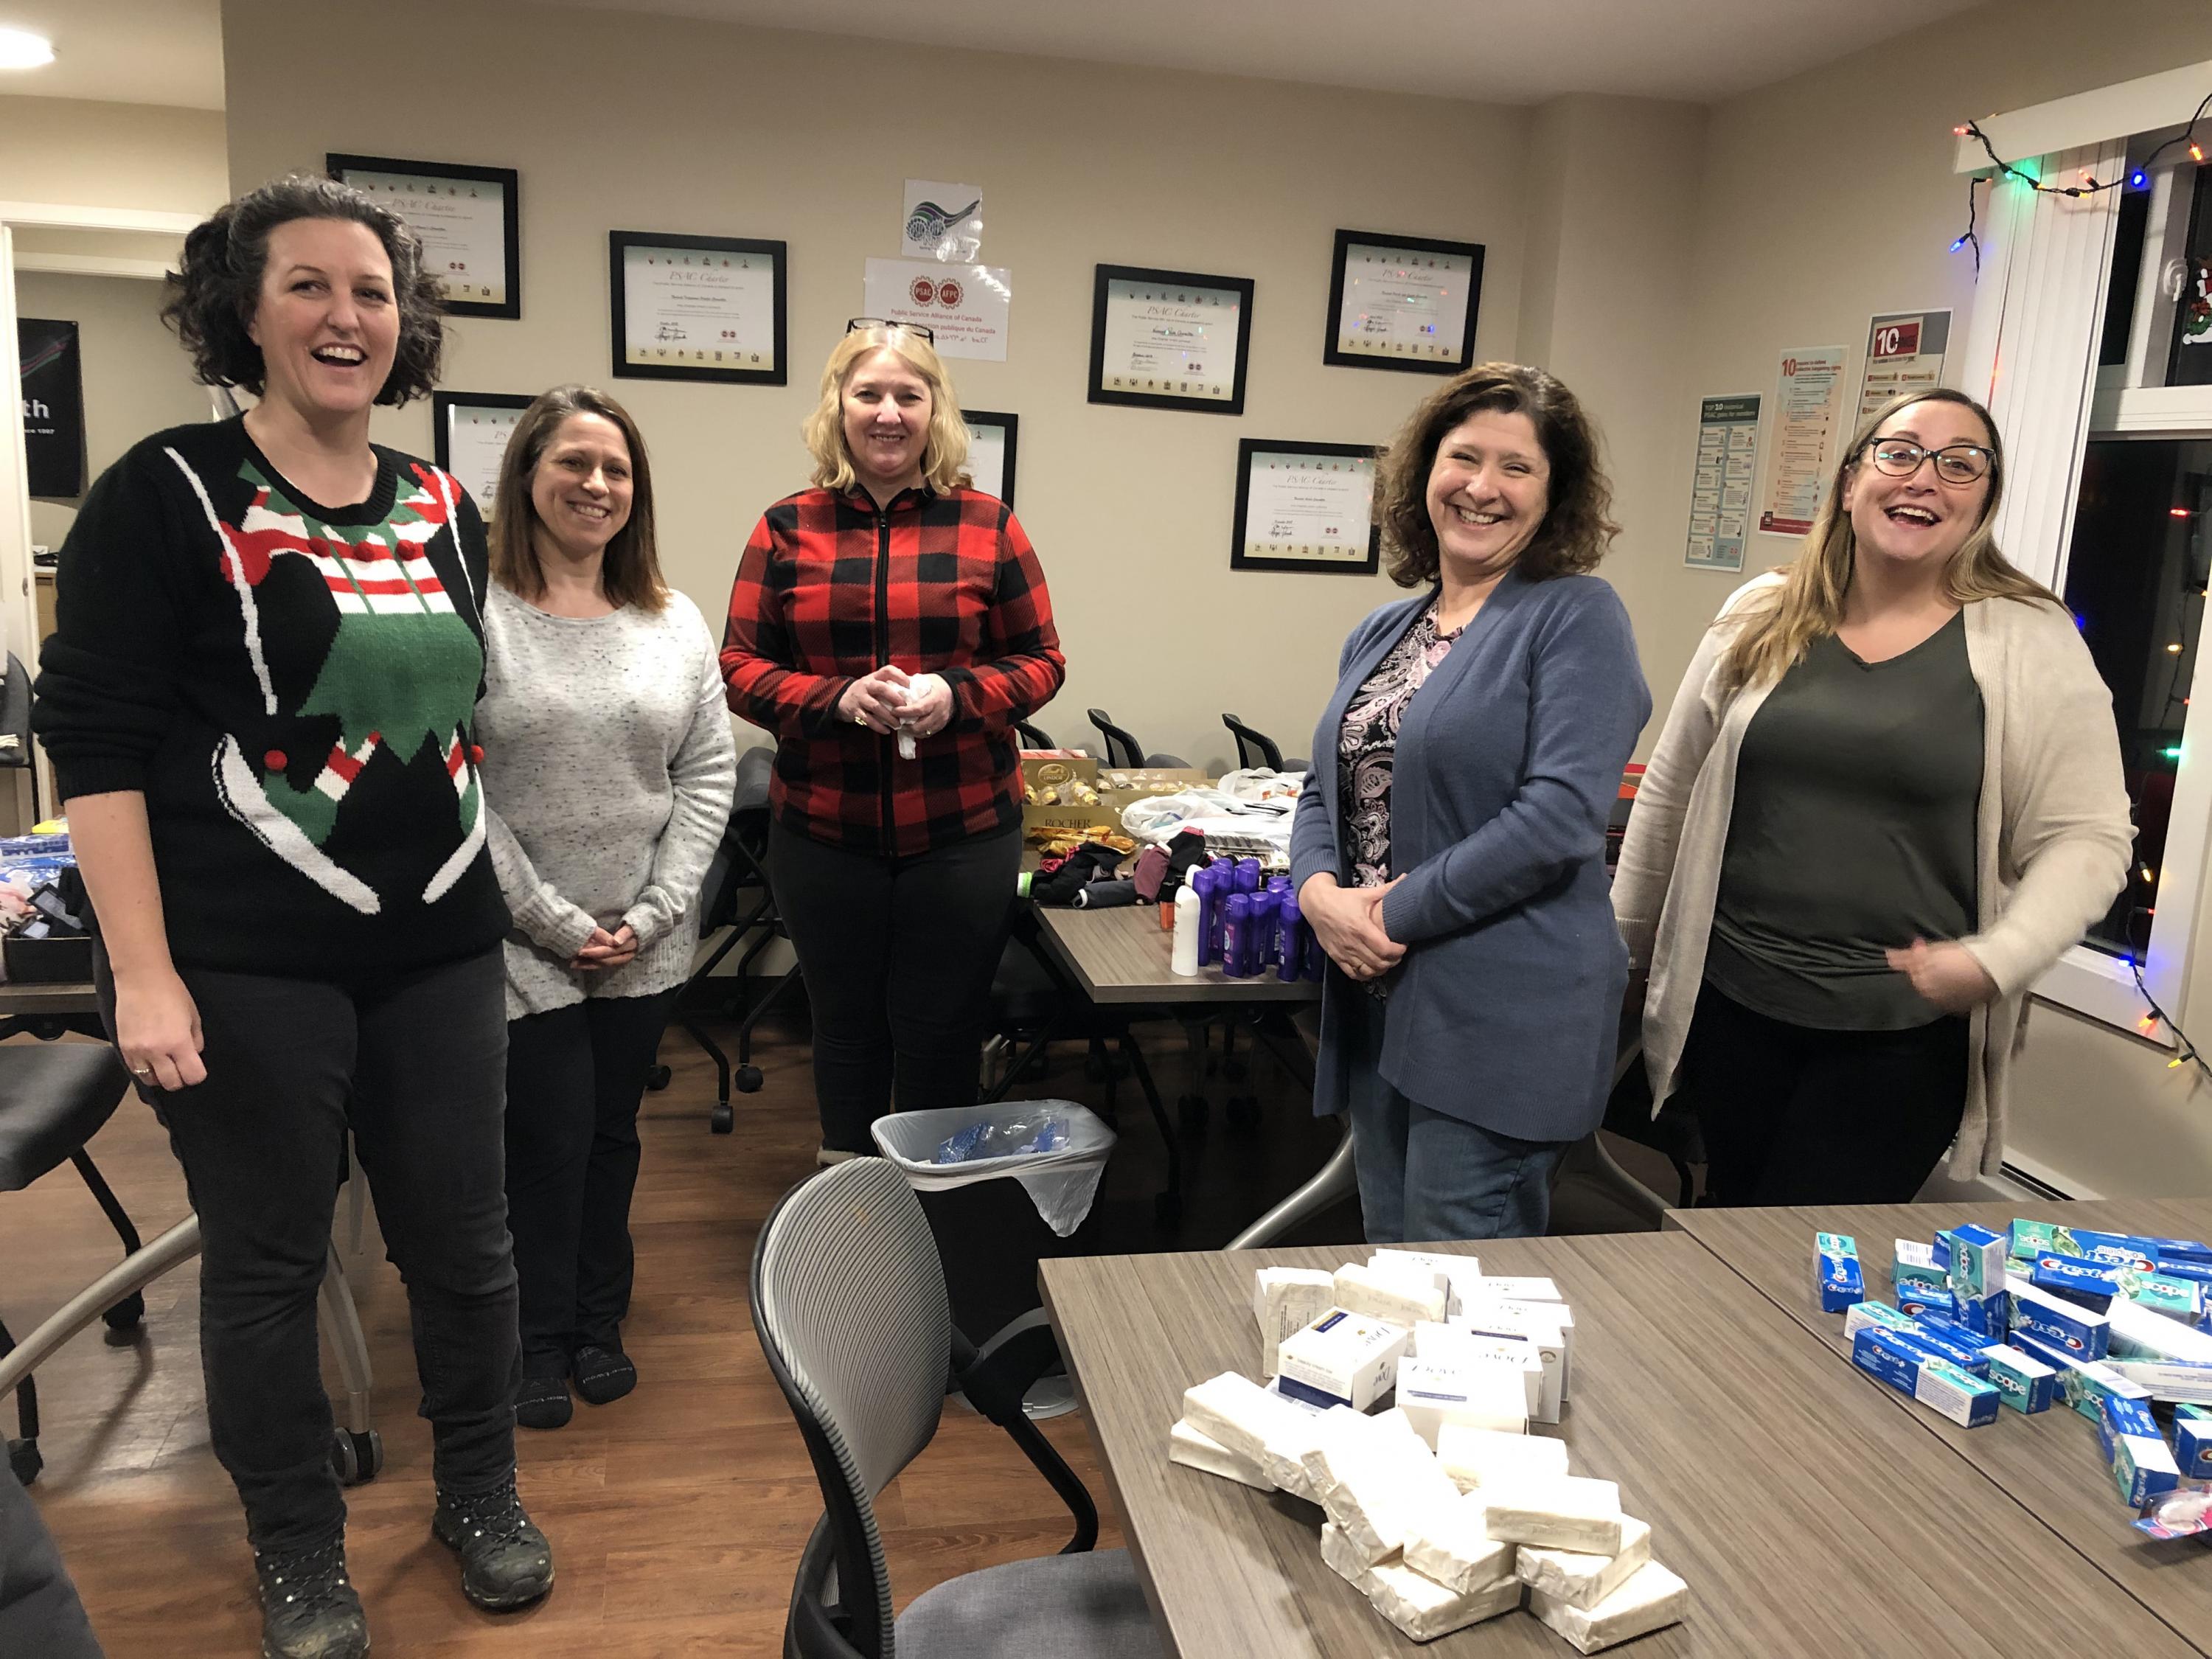 Women's Committee packing purses to be donated to women's shelter (Iqaluit) 